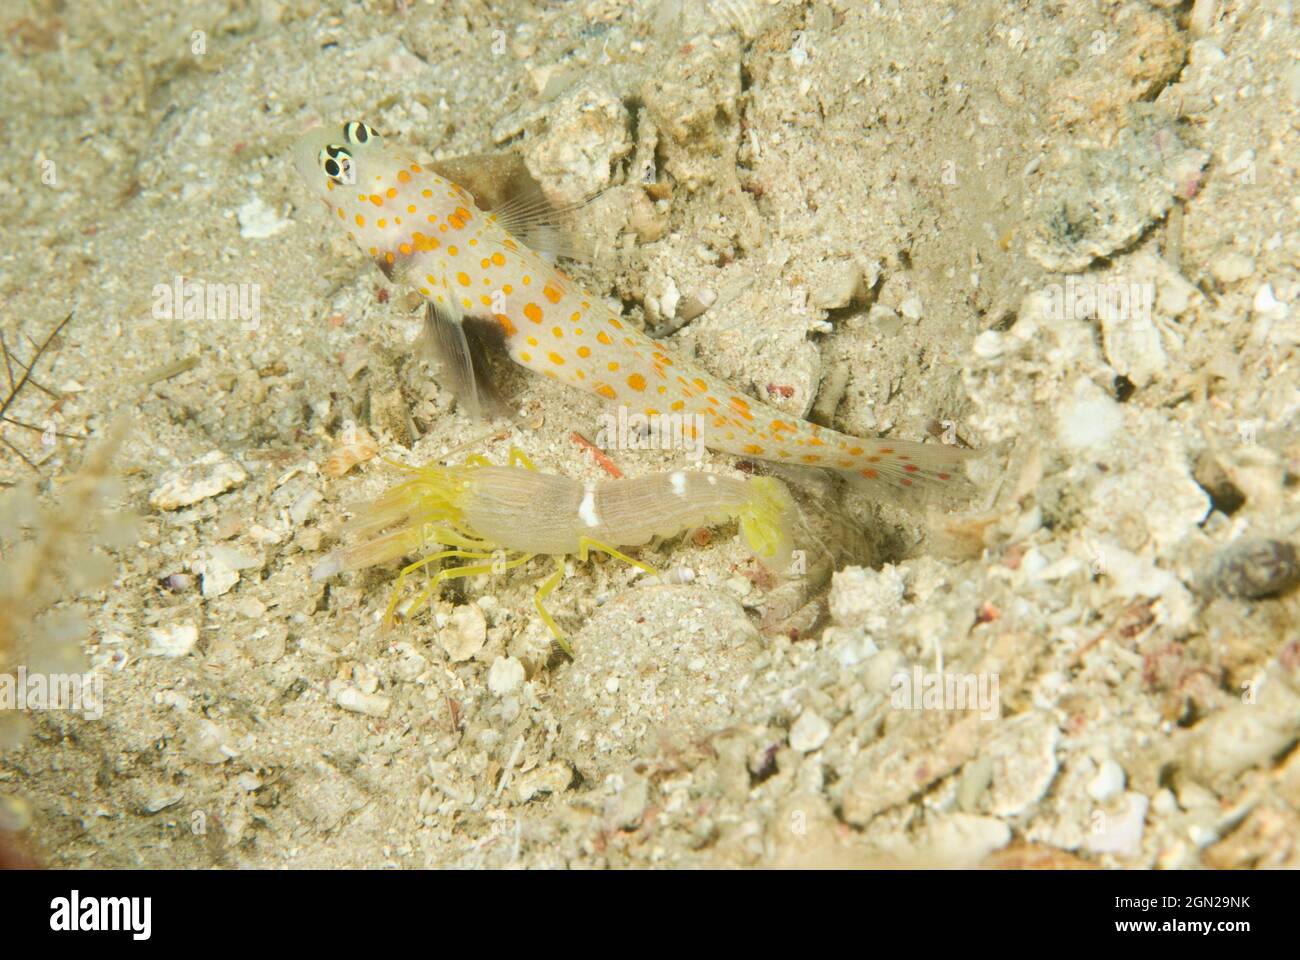 Spotted prawn-goby (Amblyeleotris guttata), Shrimp-gobies share their burrows with Alpheid shrimps. The shrimp builds and maintains the burrow, while Stock Photo